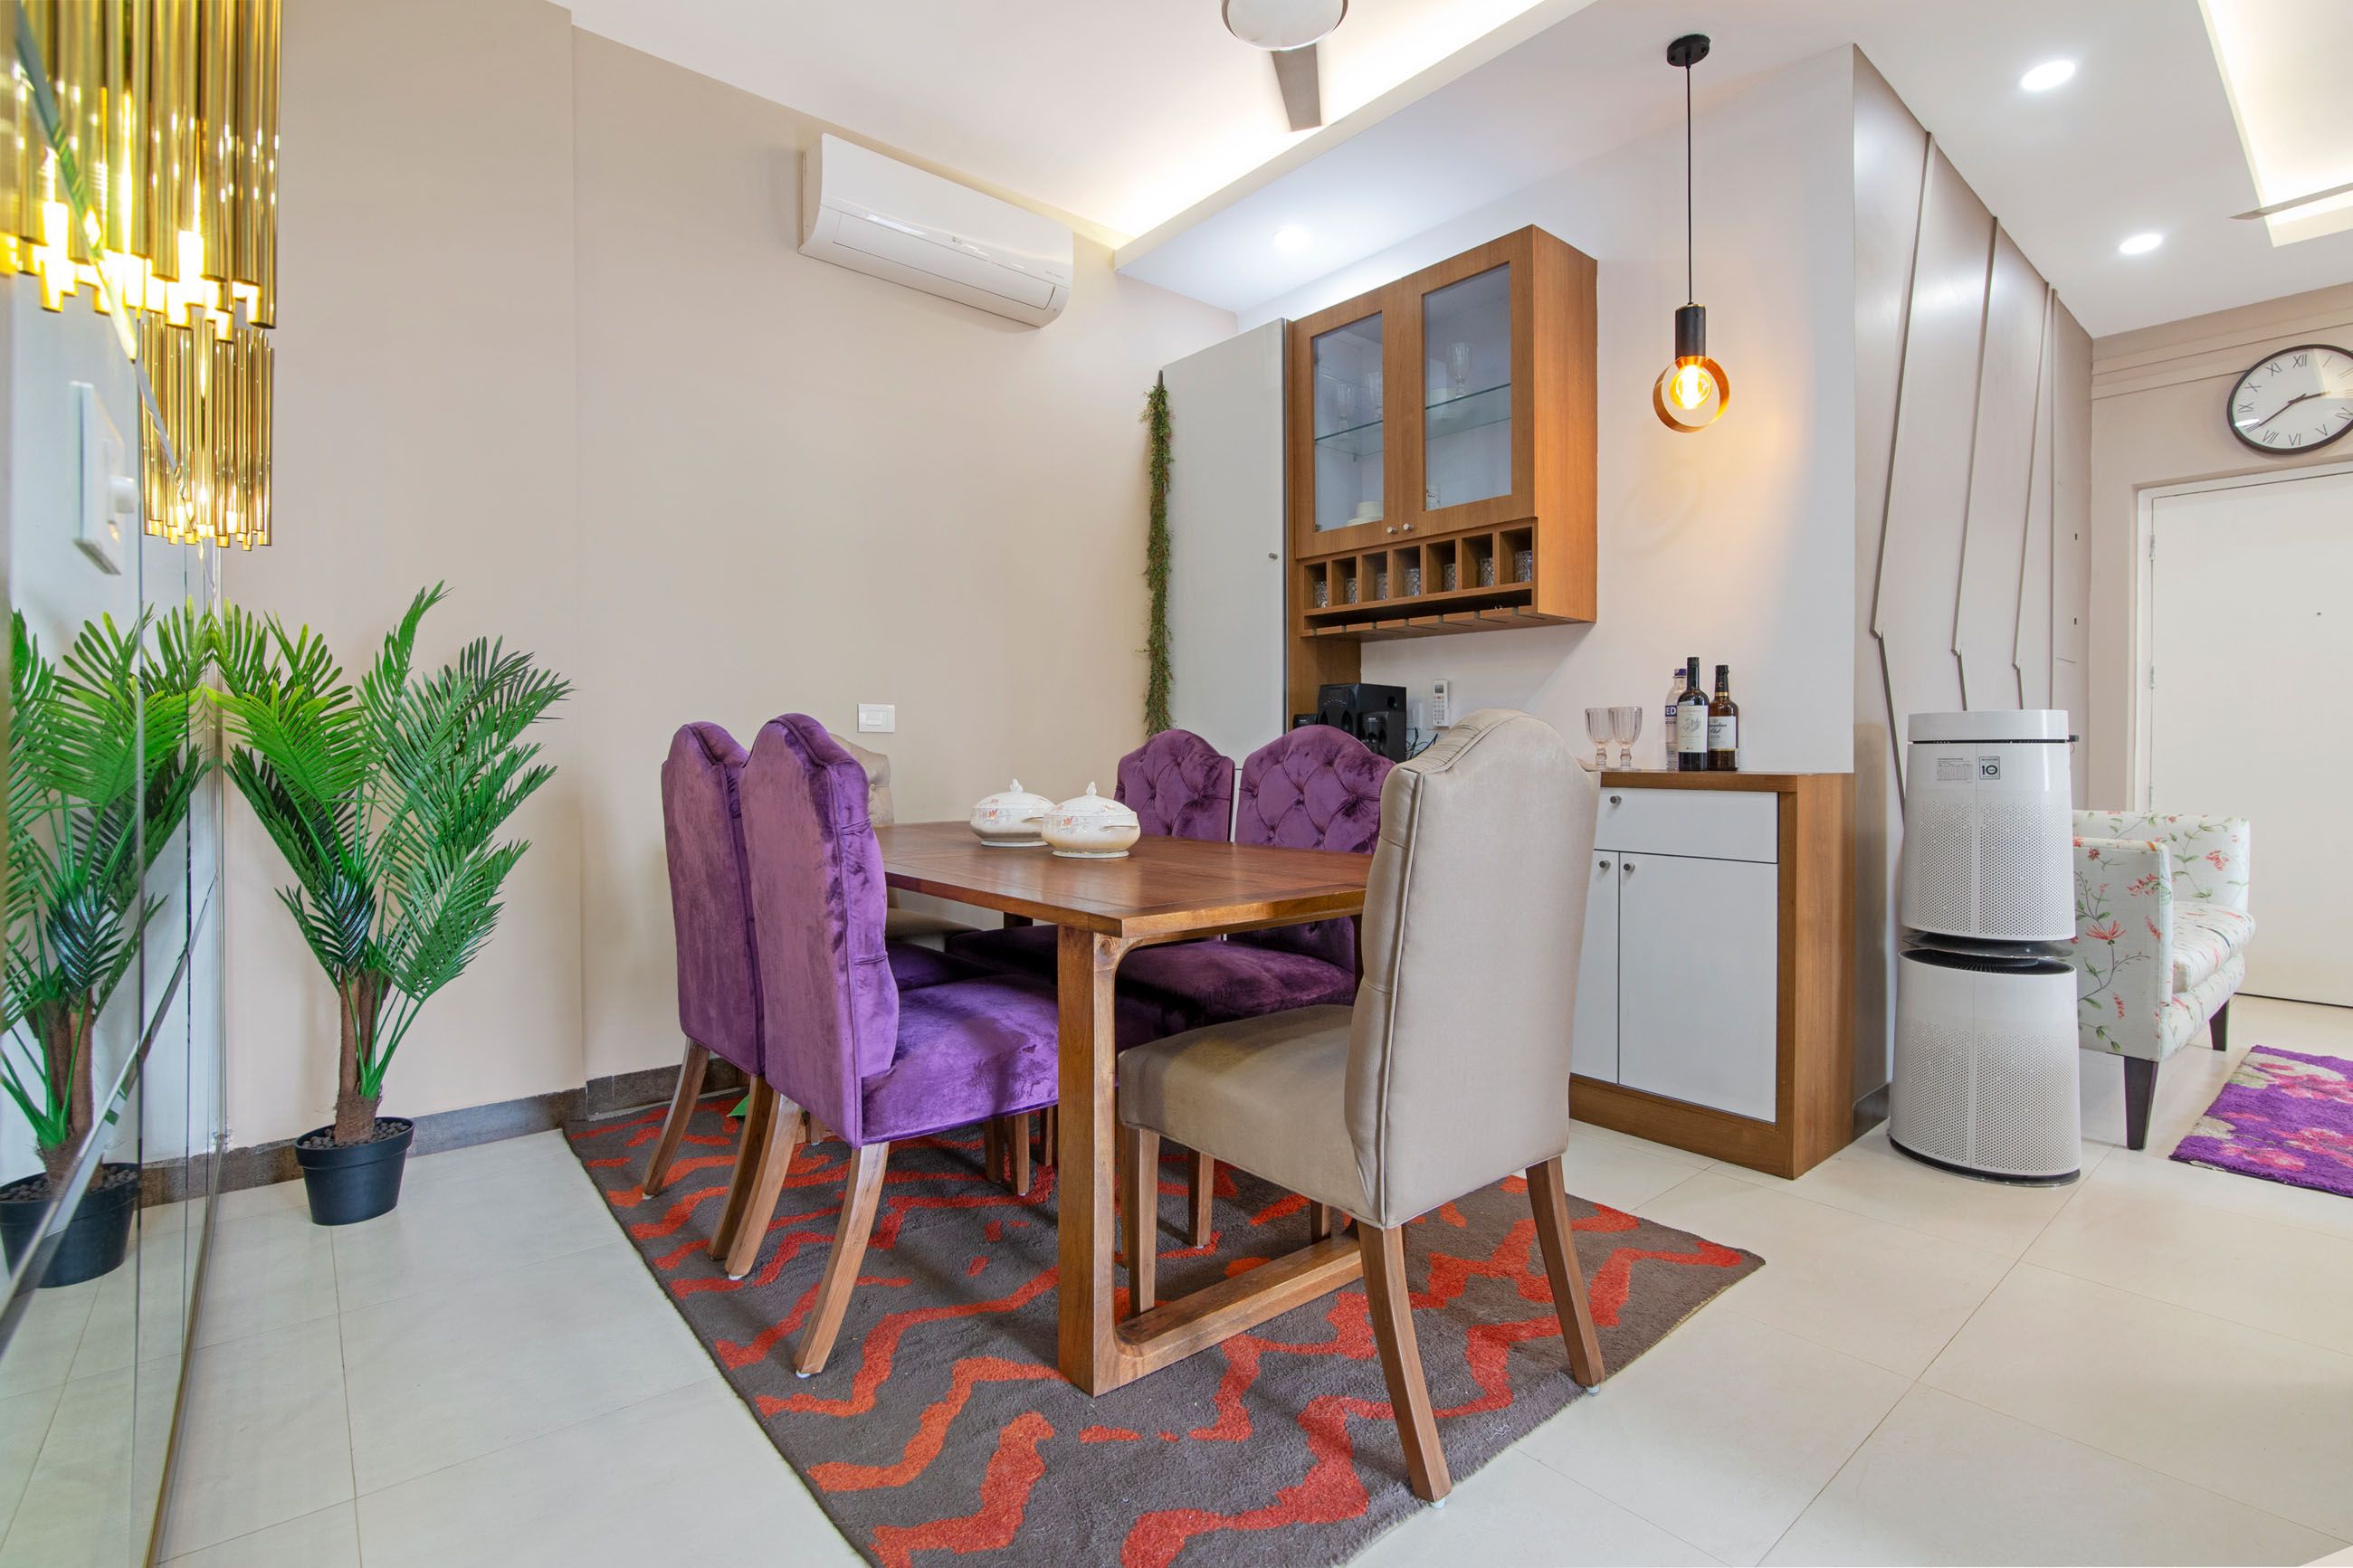 Contemporary 6-Seater Wooden Dining Room Design With Beige And Purple Chairs